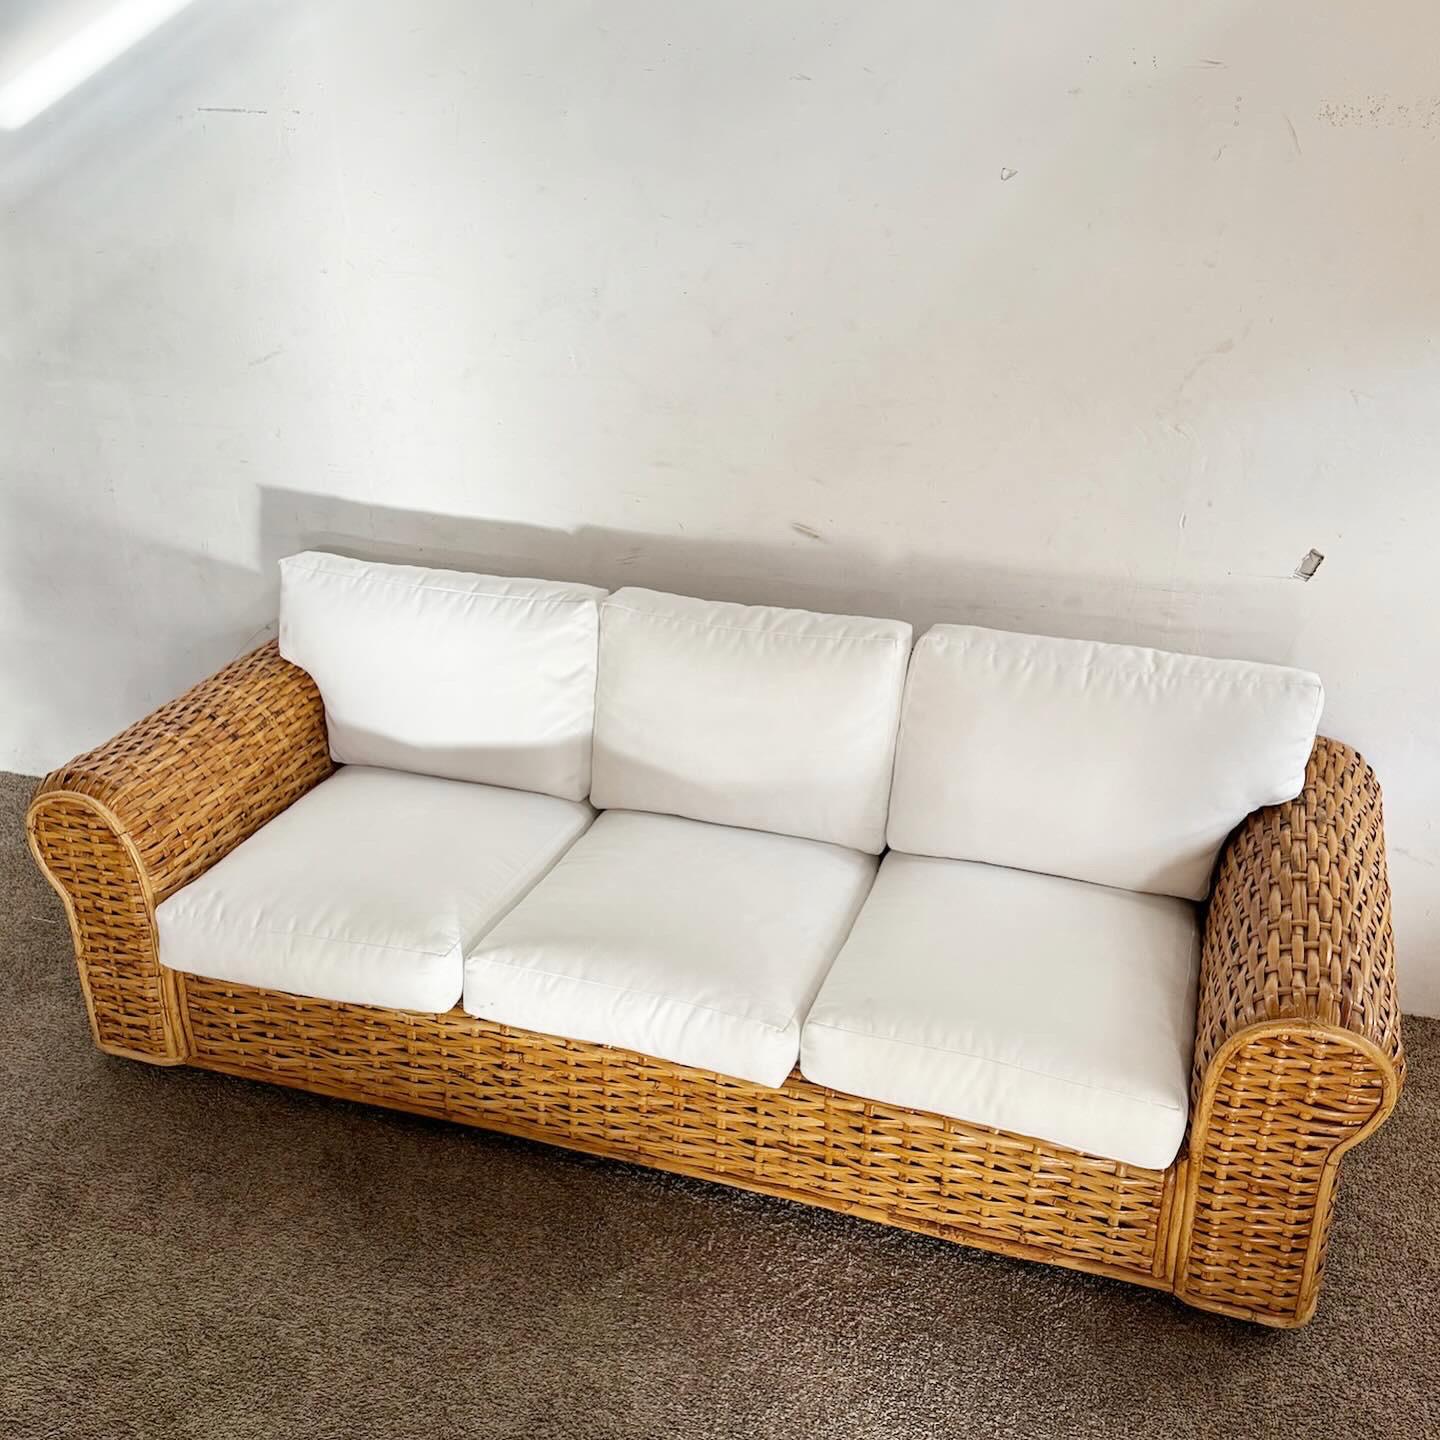 The Boho Chic Wicker Sofa by Polo Ralph Lauren, with its elegant white cushions, offers a blend of comfort and style. Its natural wicker construction and sophisticated design make it ideal for sunrooms, living areas, or patios, embodying laid-back